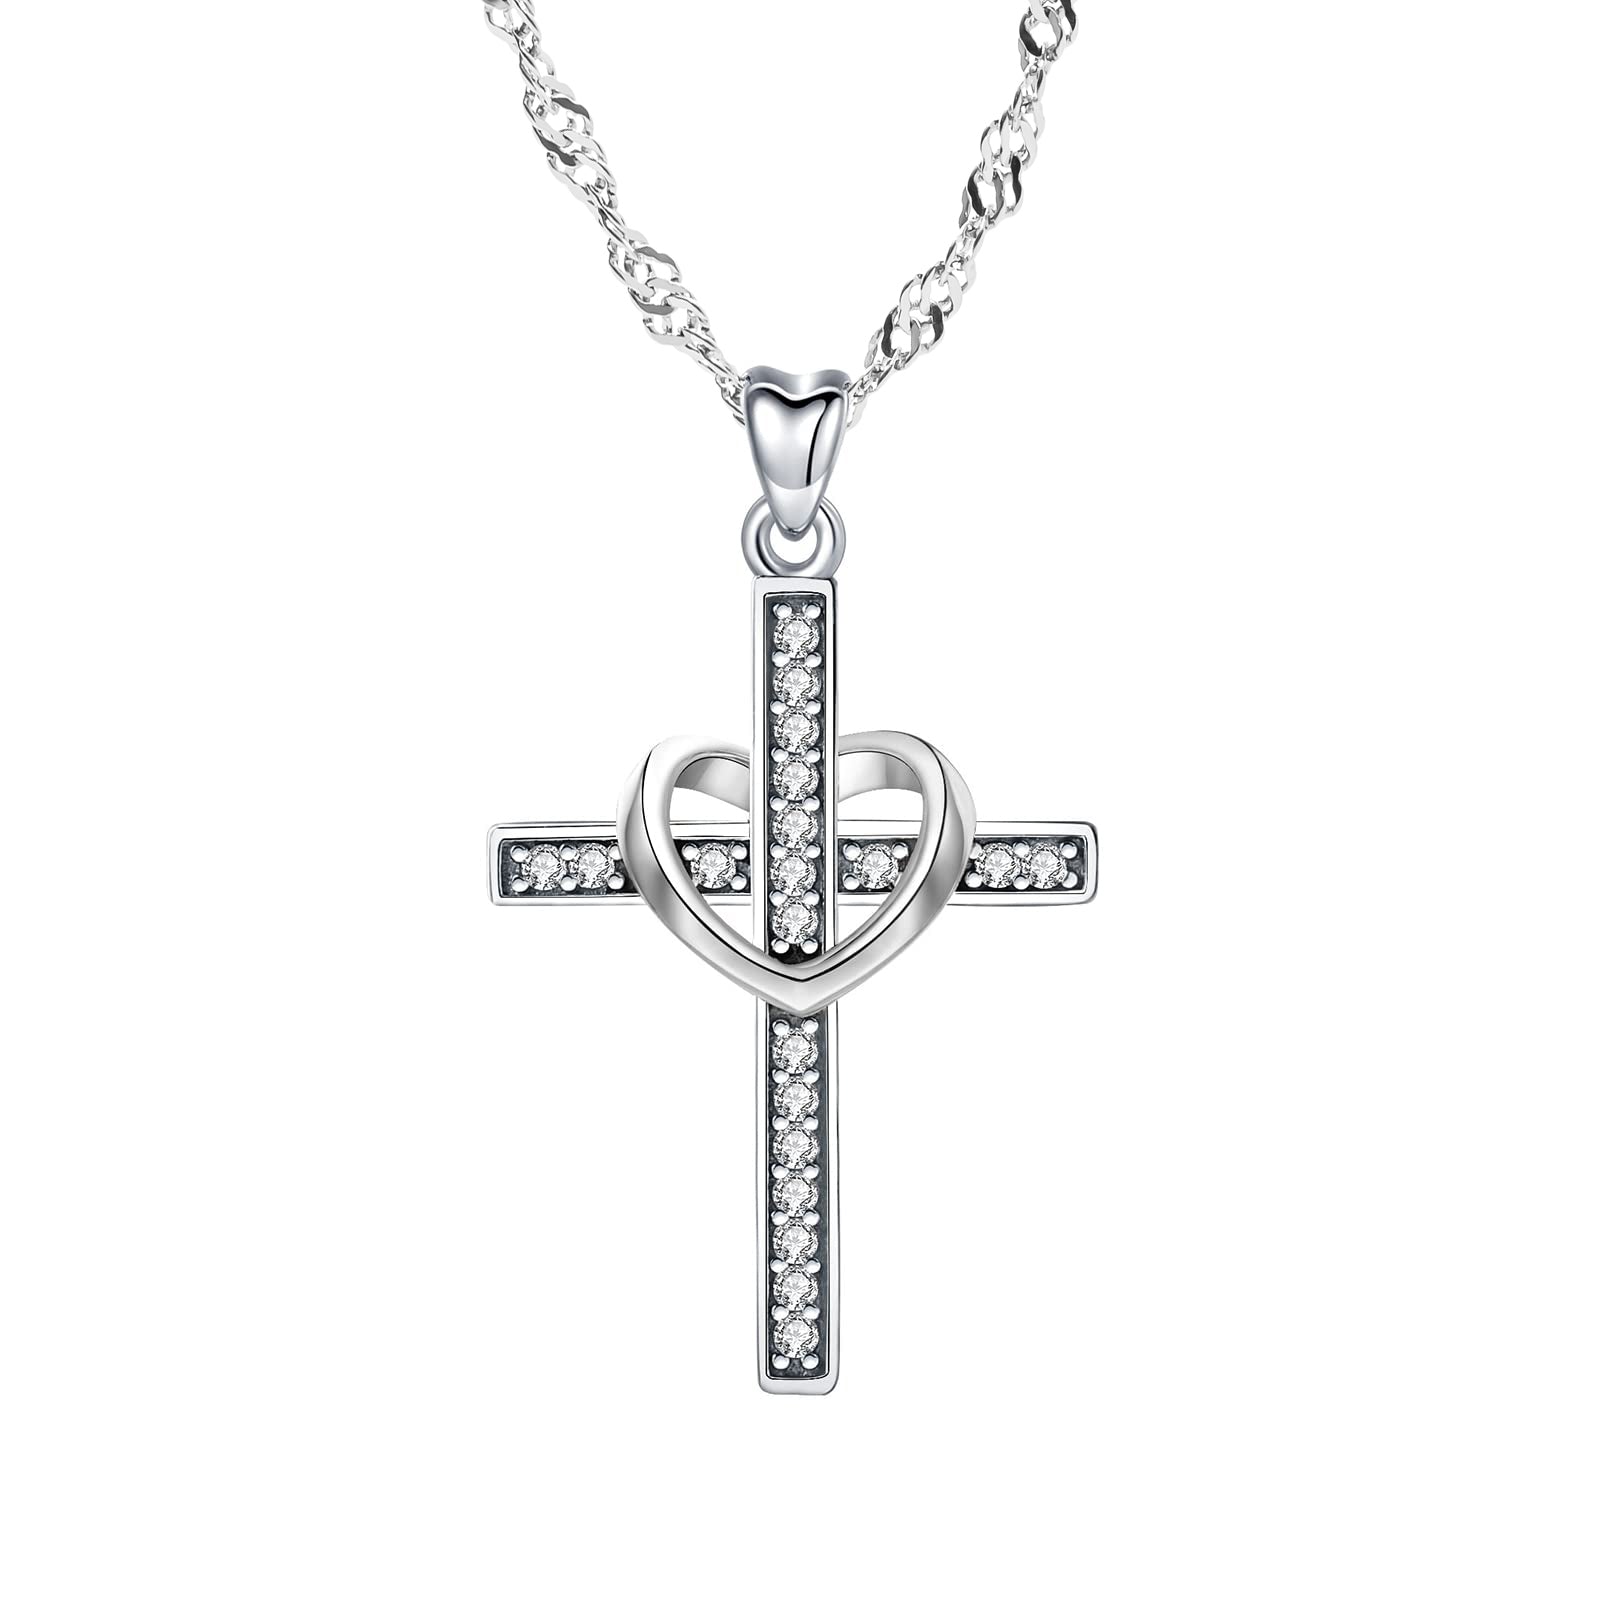 Cross and Heart Crystal Pendant 925 Sterling Silver Water Wave necklace chain 18"